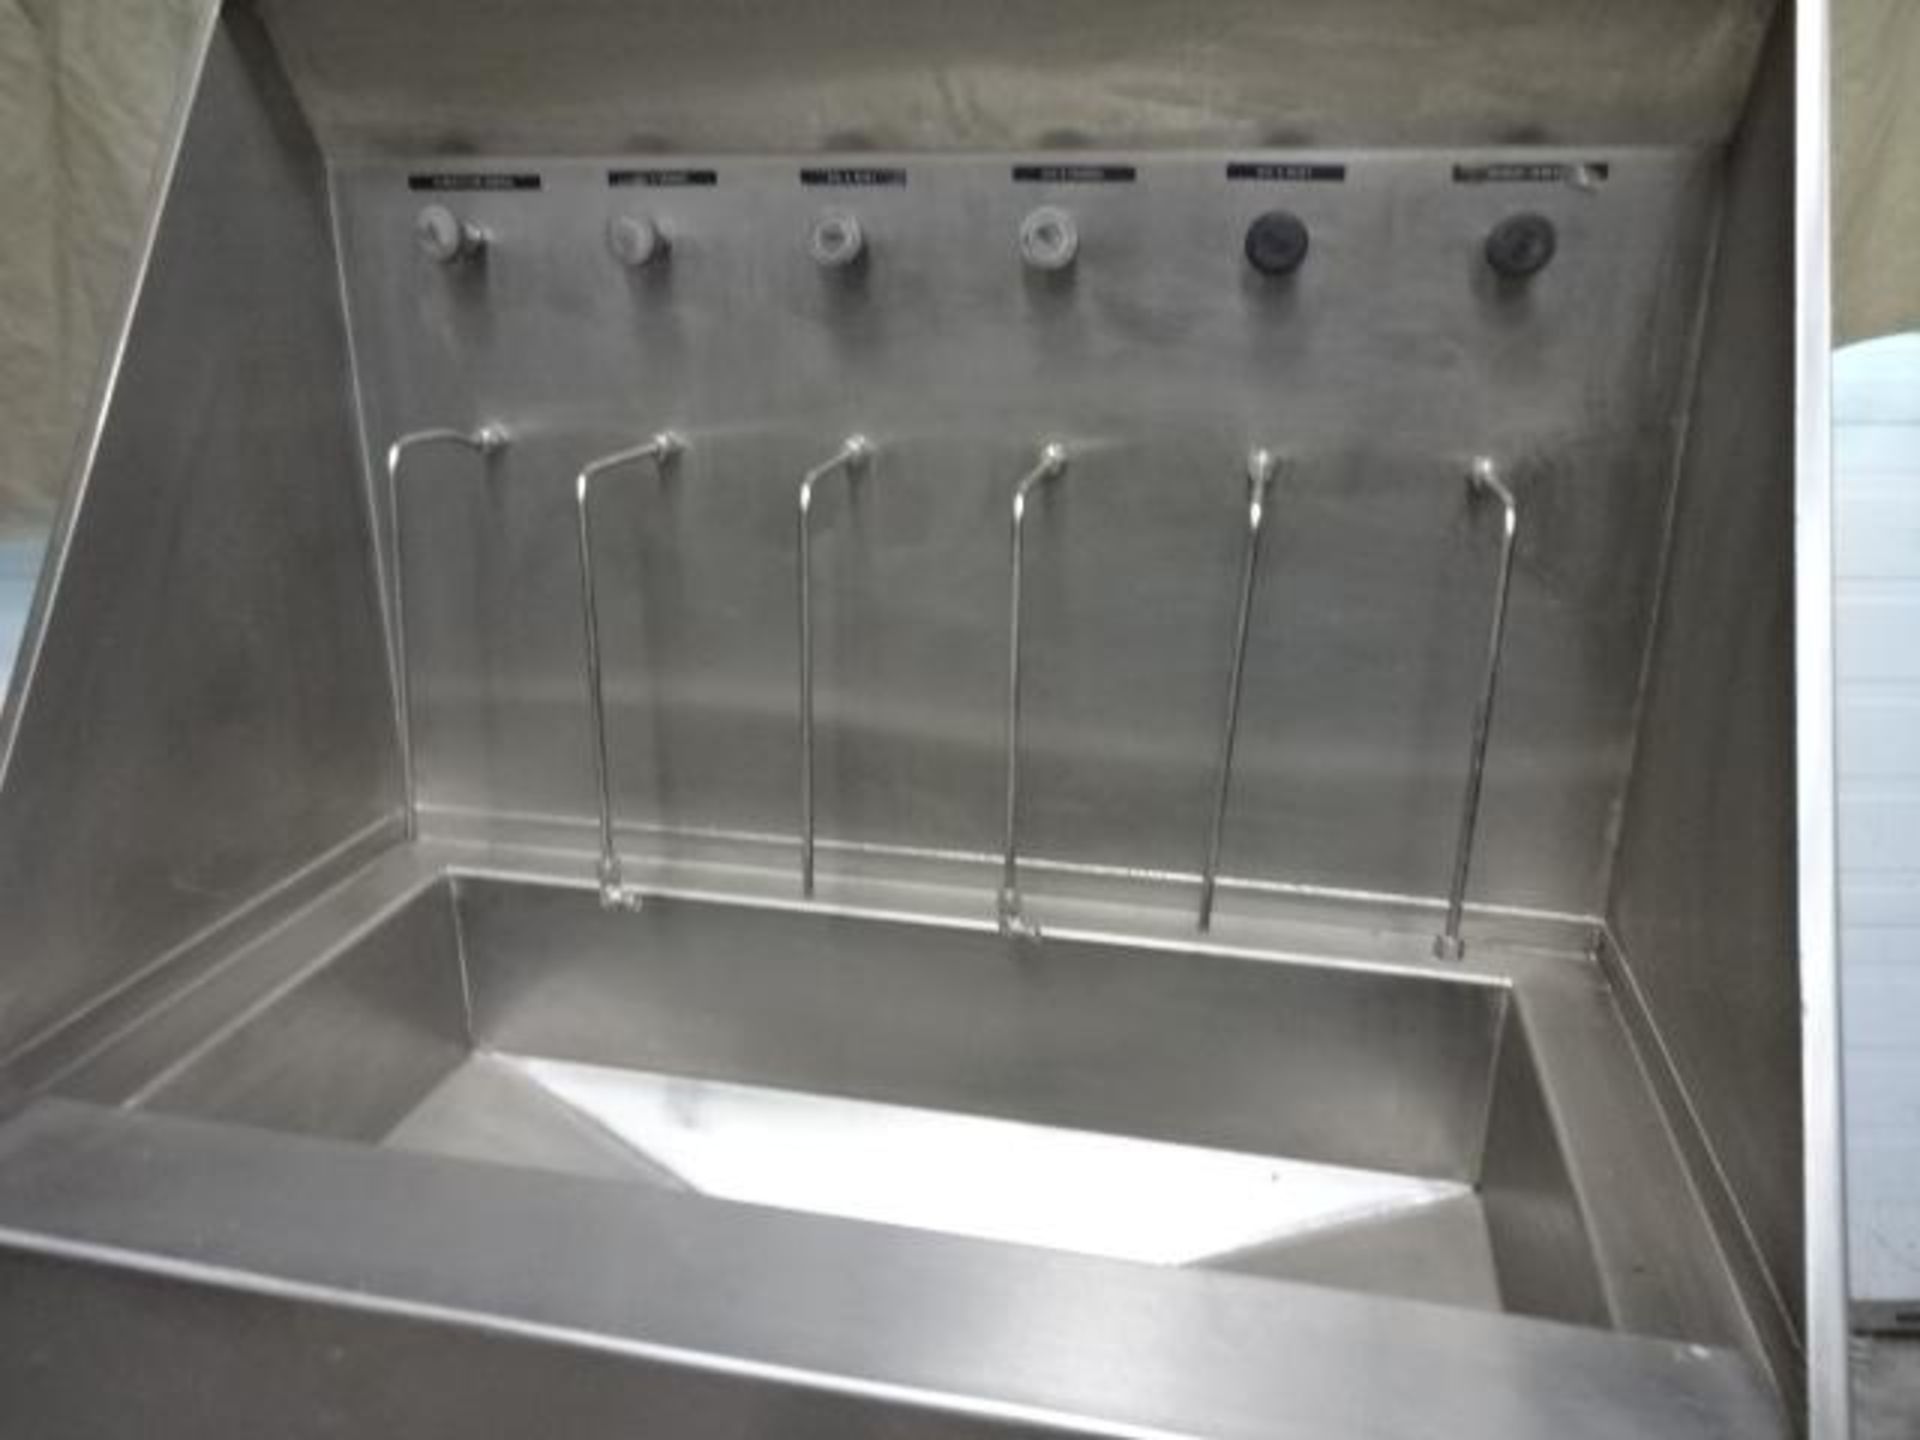 Washbasin / stainless shower - Lavabo/douche stainless - Image 2 of 4